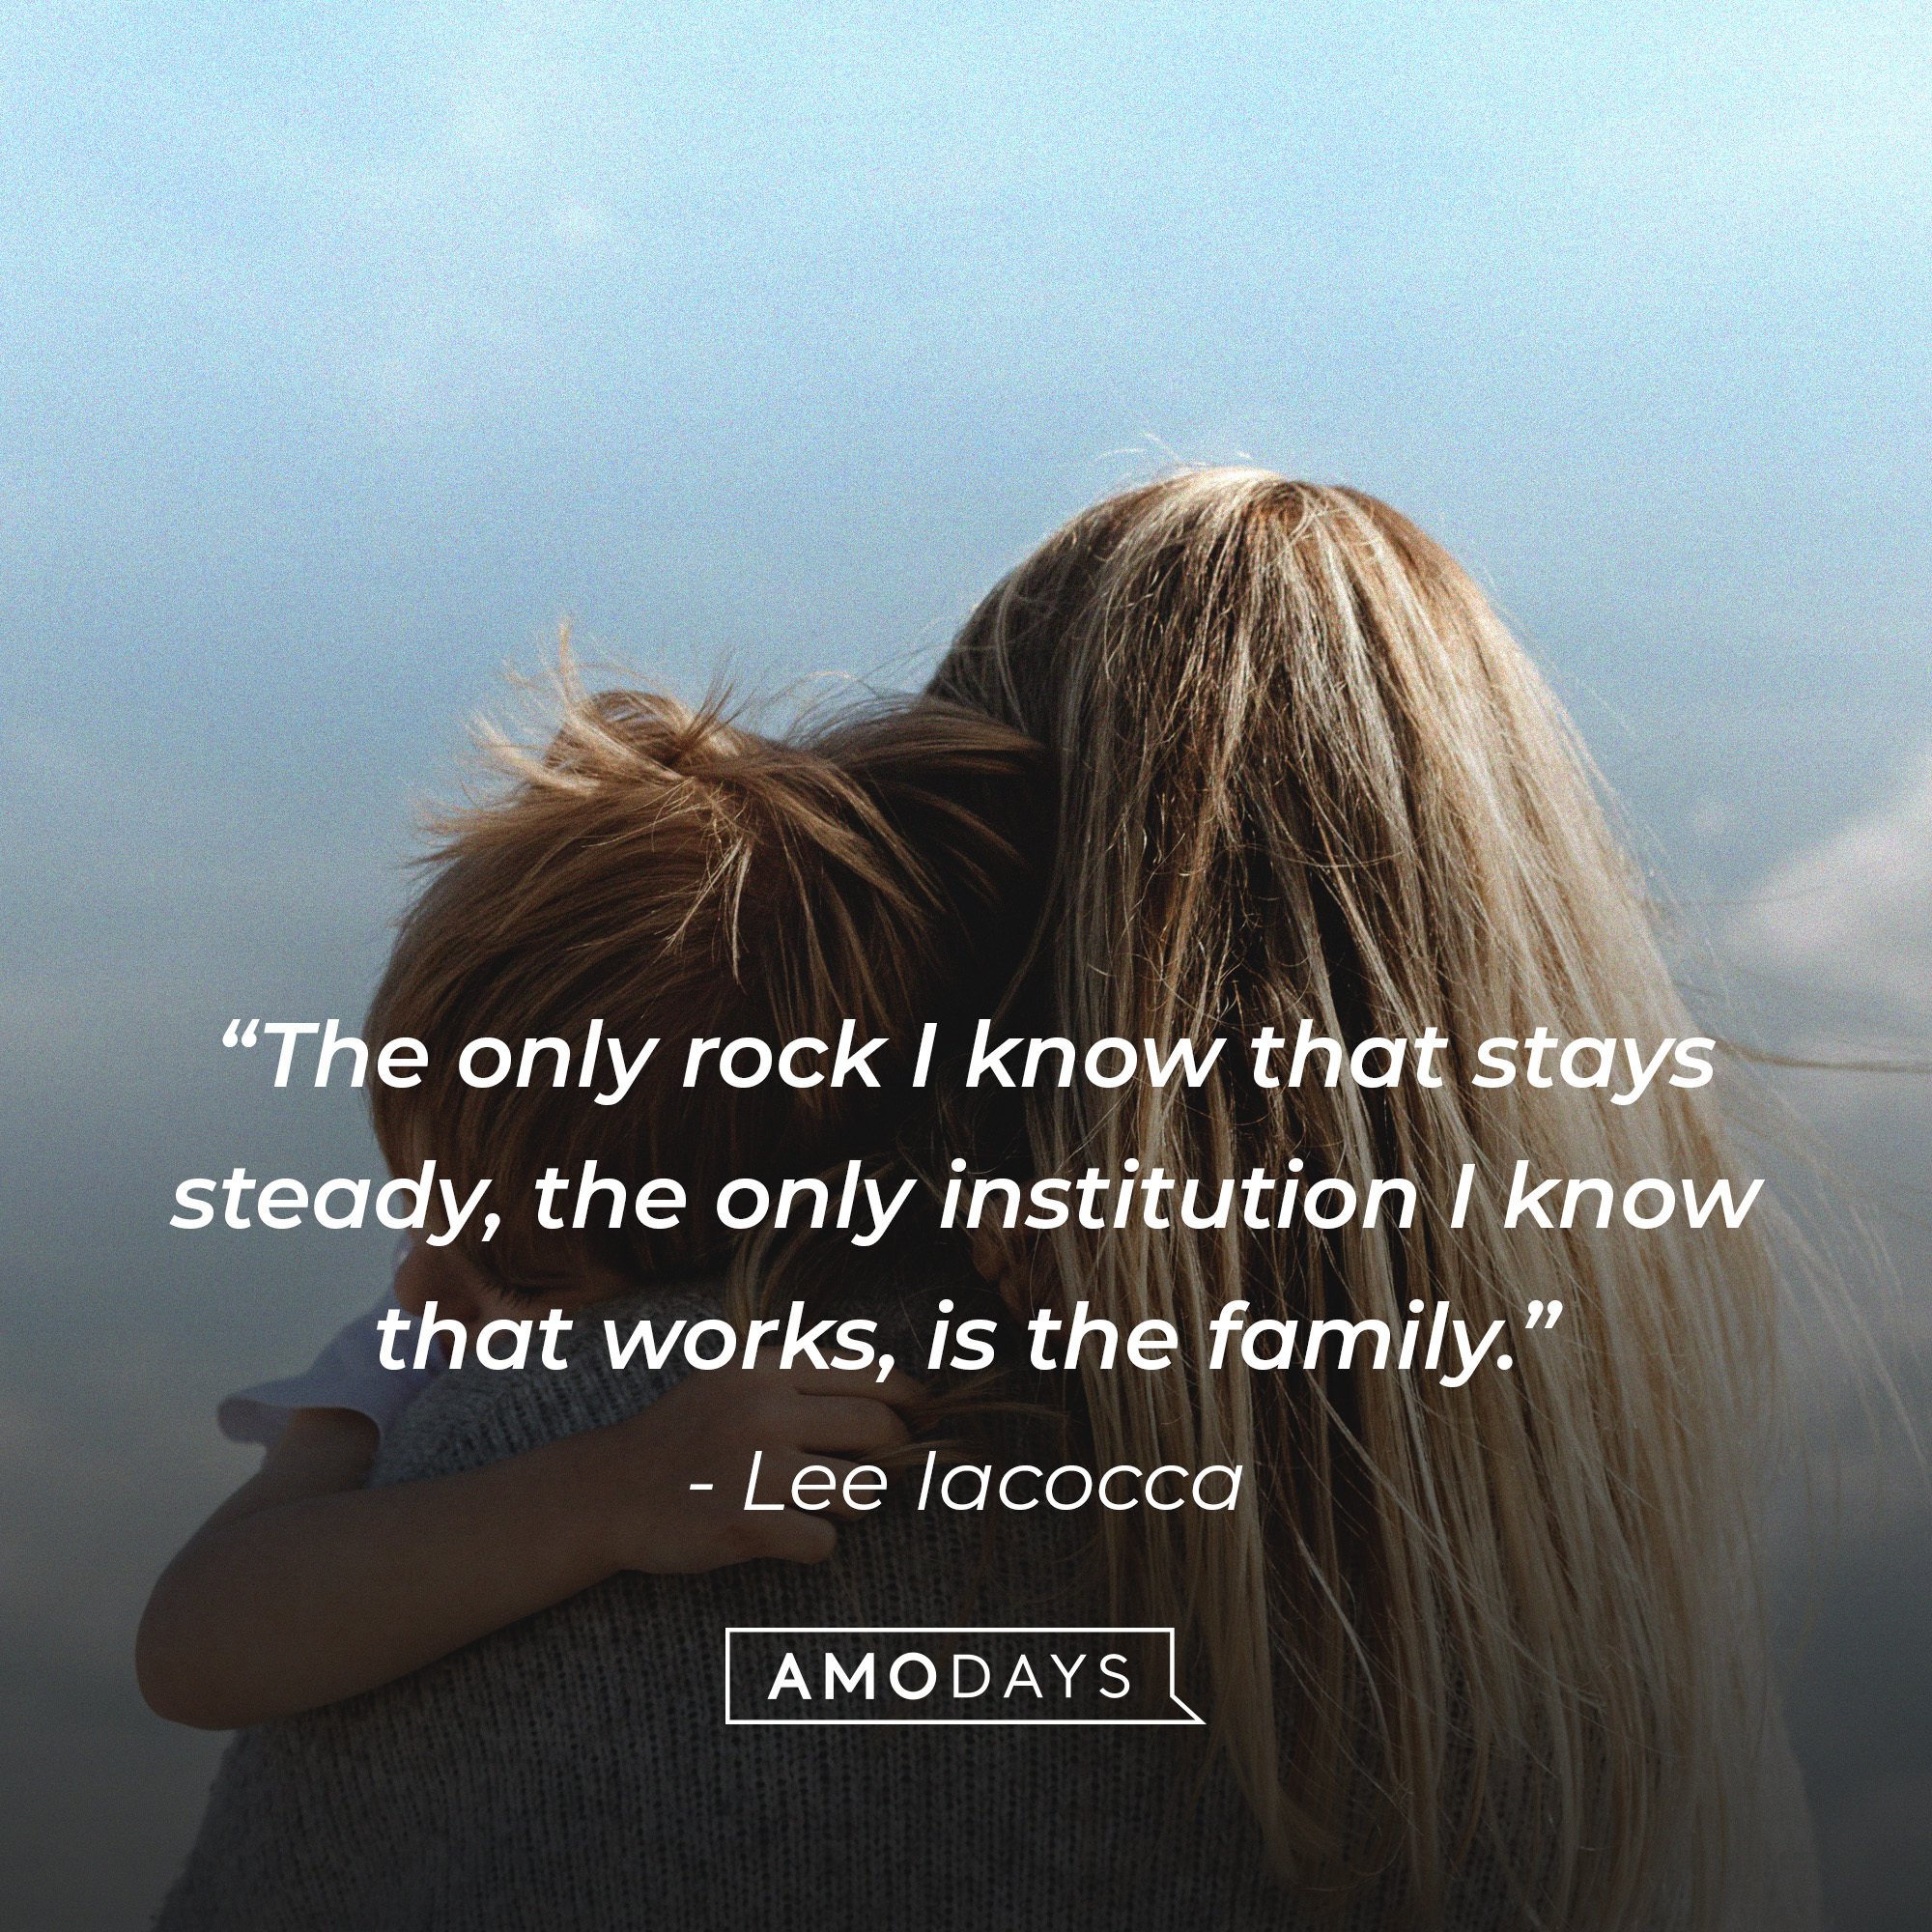 Lee lacocca's quote: The only rock that I know stays steady, the only institution that I know that works, is the family." | Image: AmoDays 